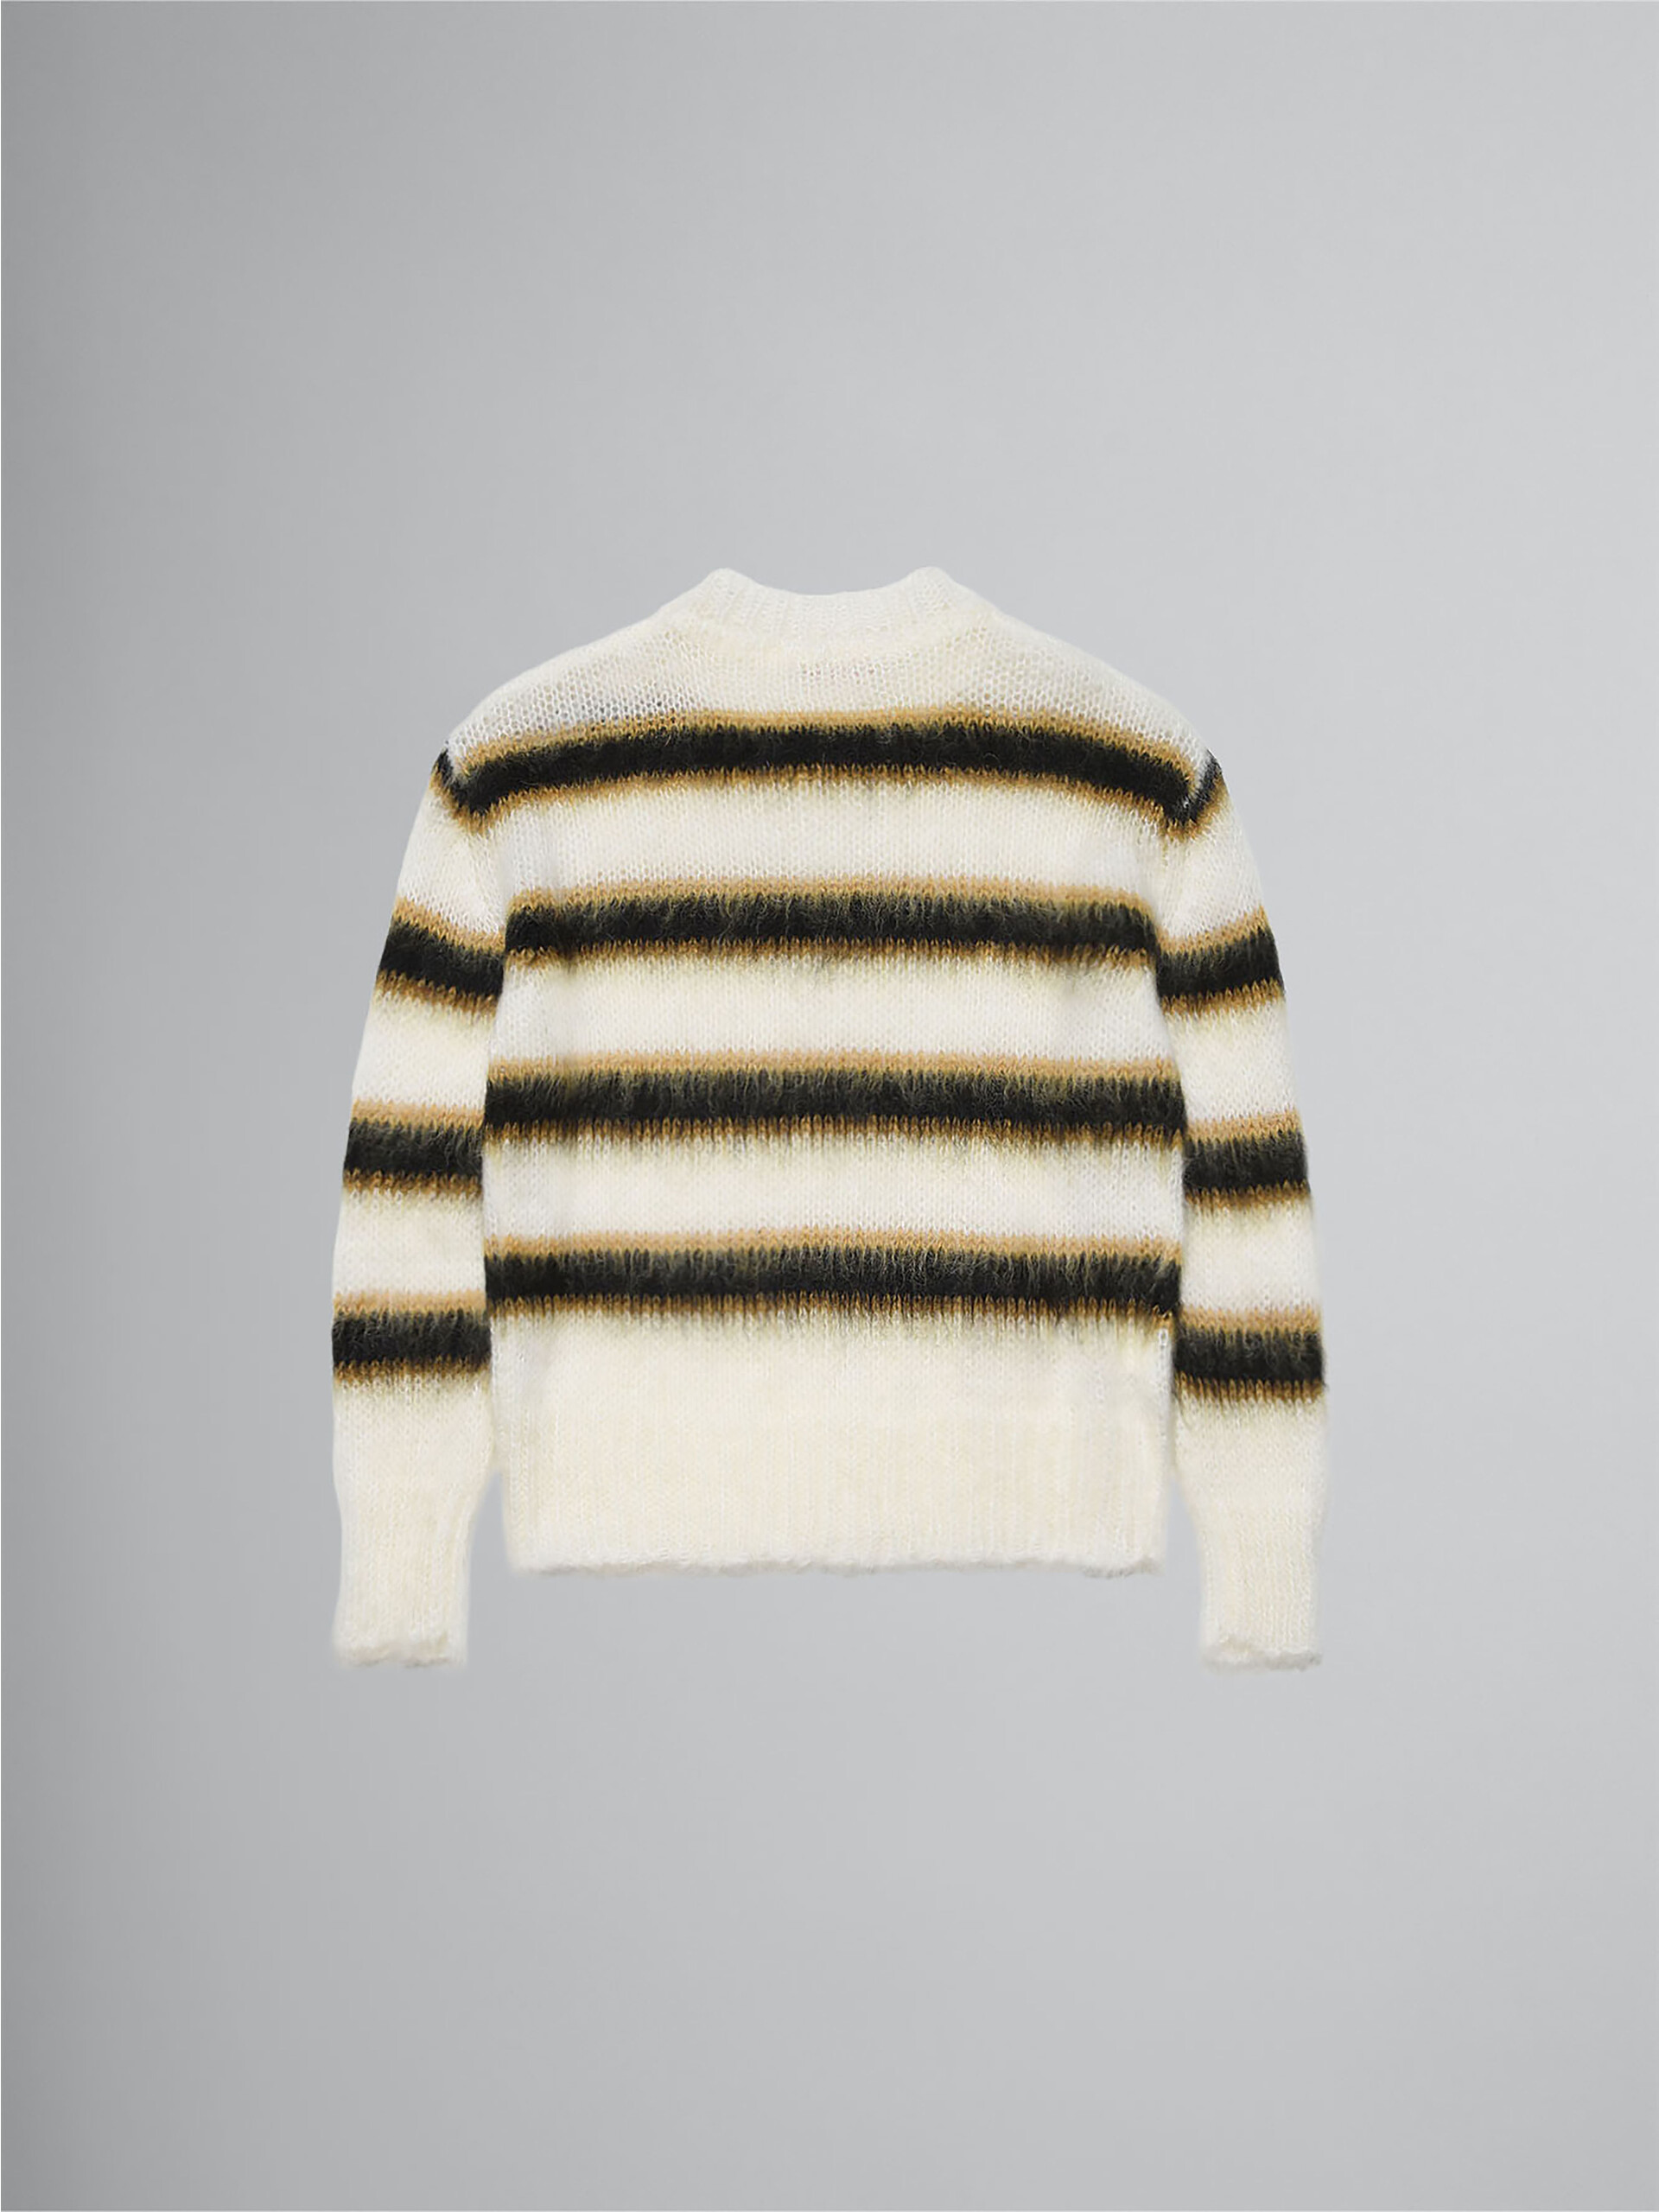 Striped wool and mohair crewneck jumper - Knitwear - Image 2